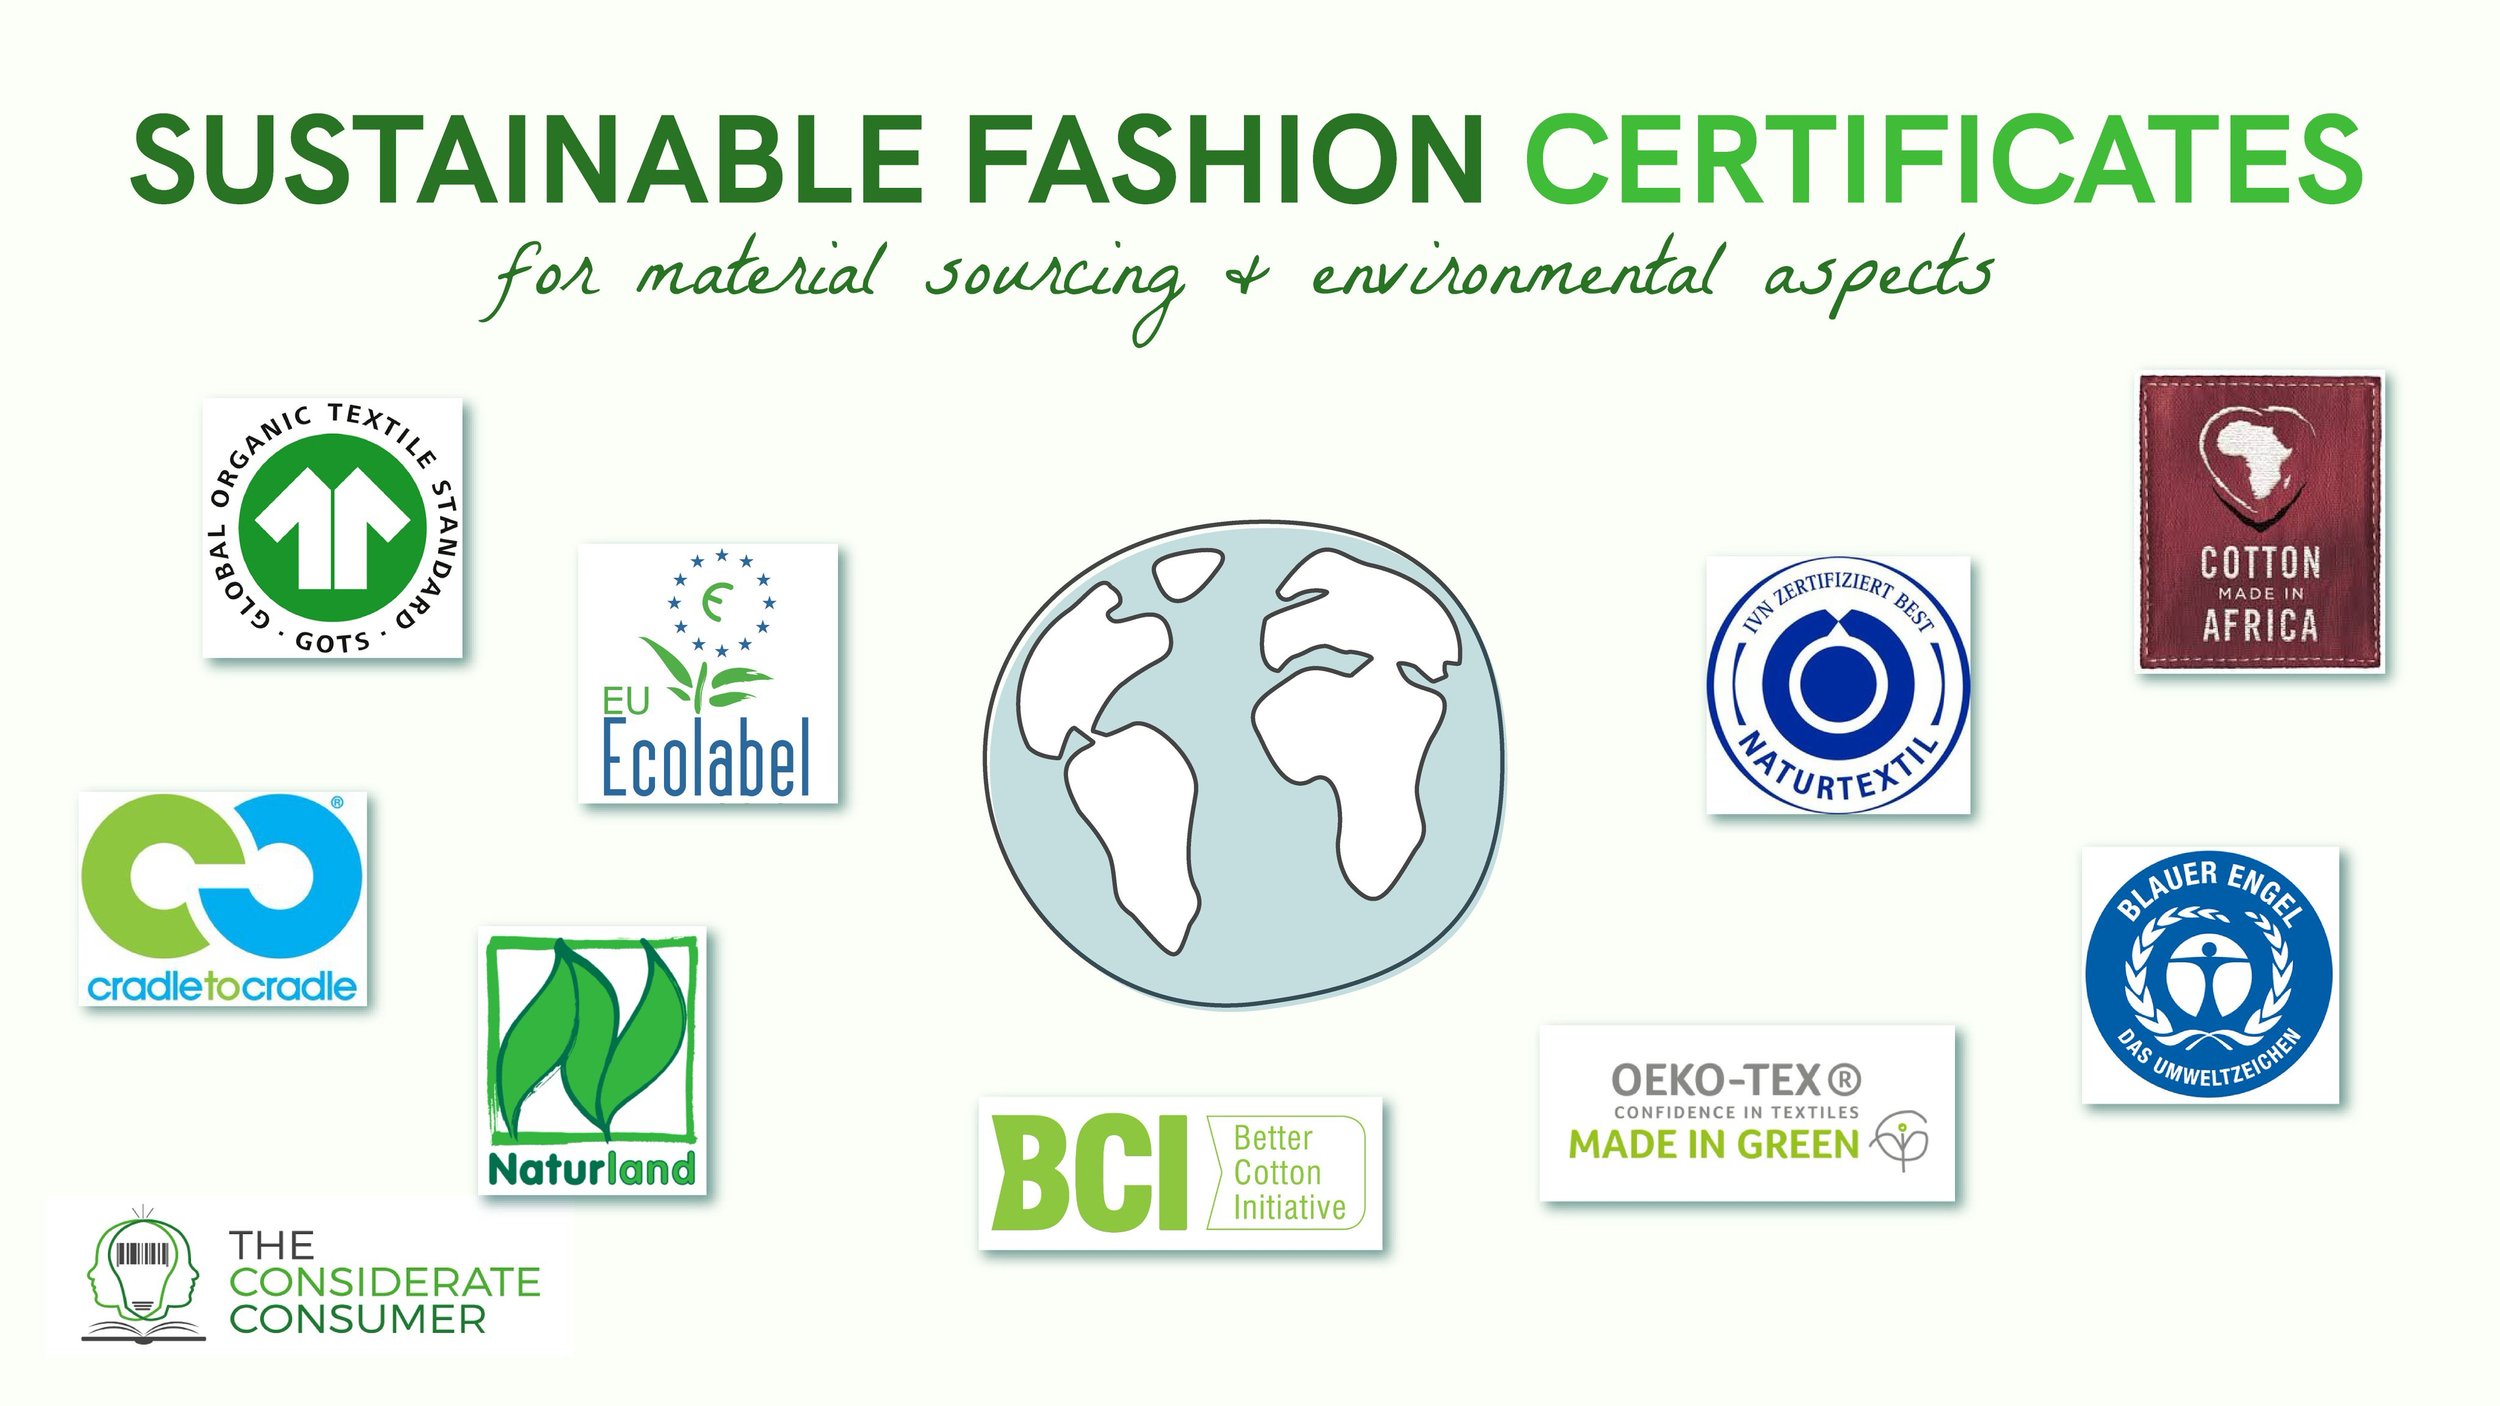 GOTS certificate - quality assurance of textiles made from organic fibres